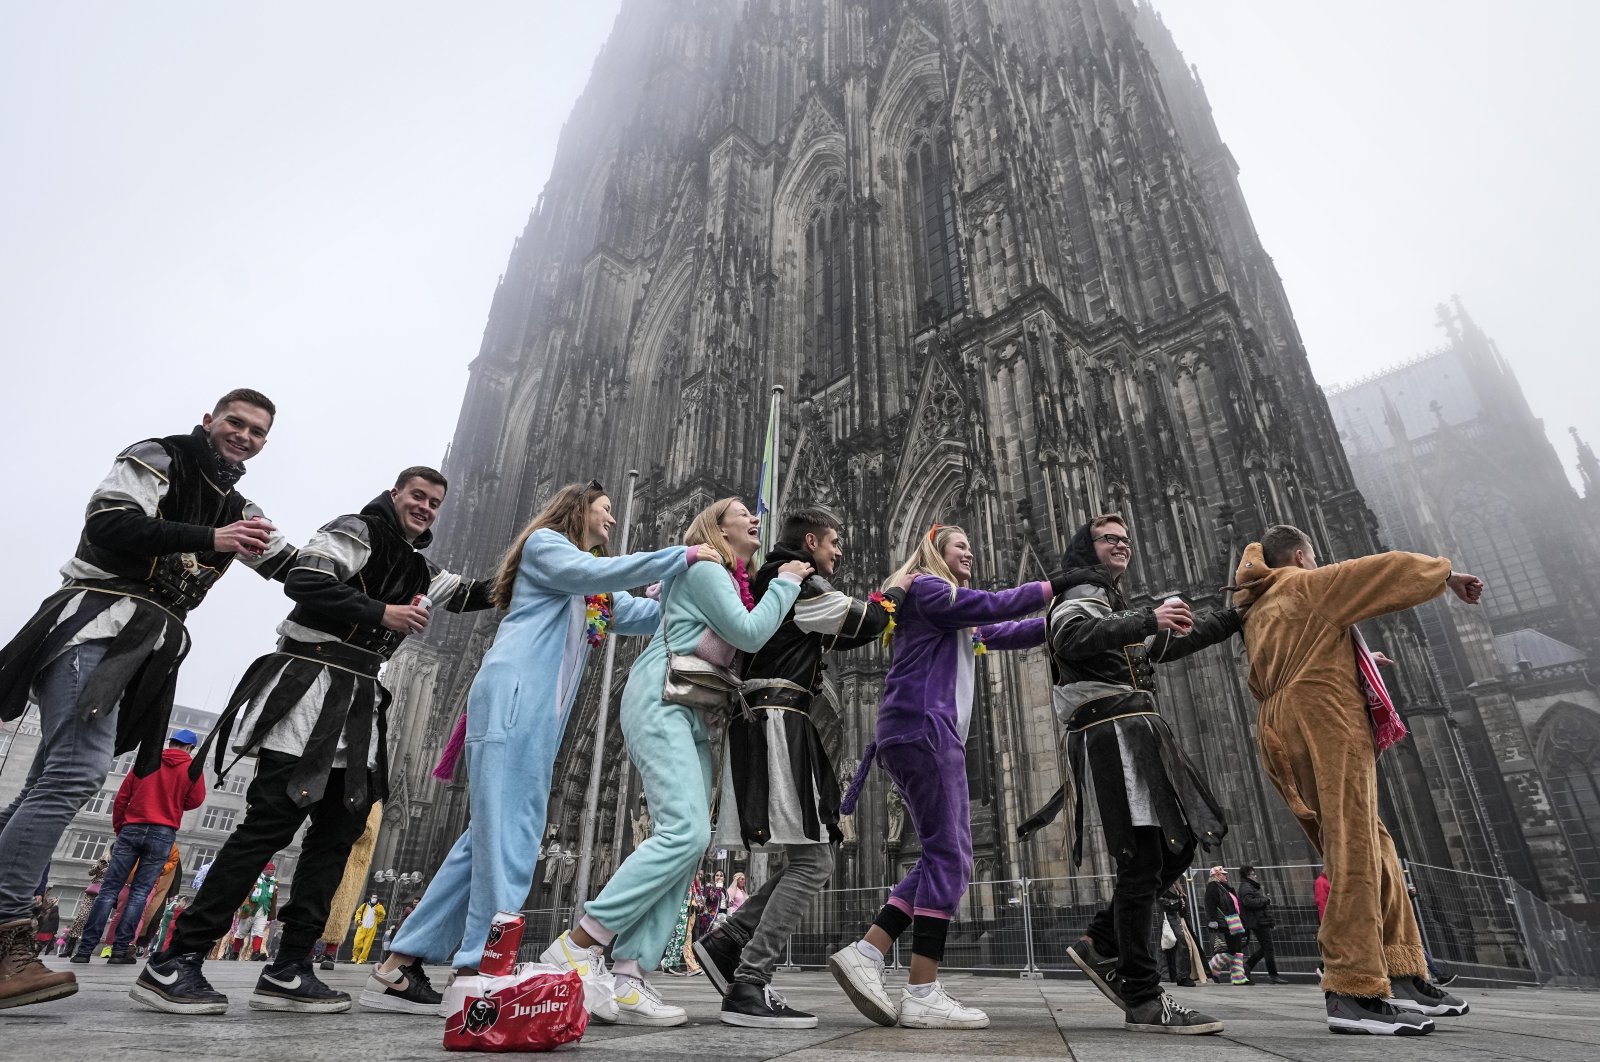 Young carnival revellers dance in front of the Cologne Cathedral when tens of thousands celebrate the start of the carnival season in the streets of Cologne, Germany, Nov. 11, 2021. (AP Photo)